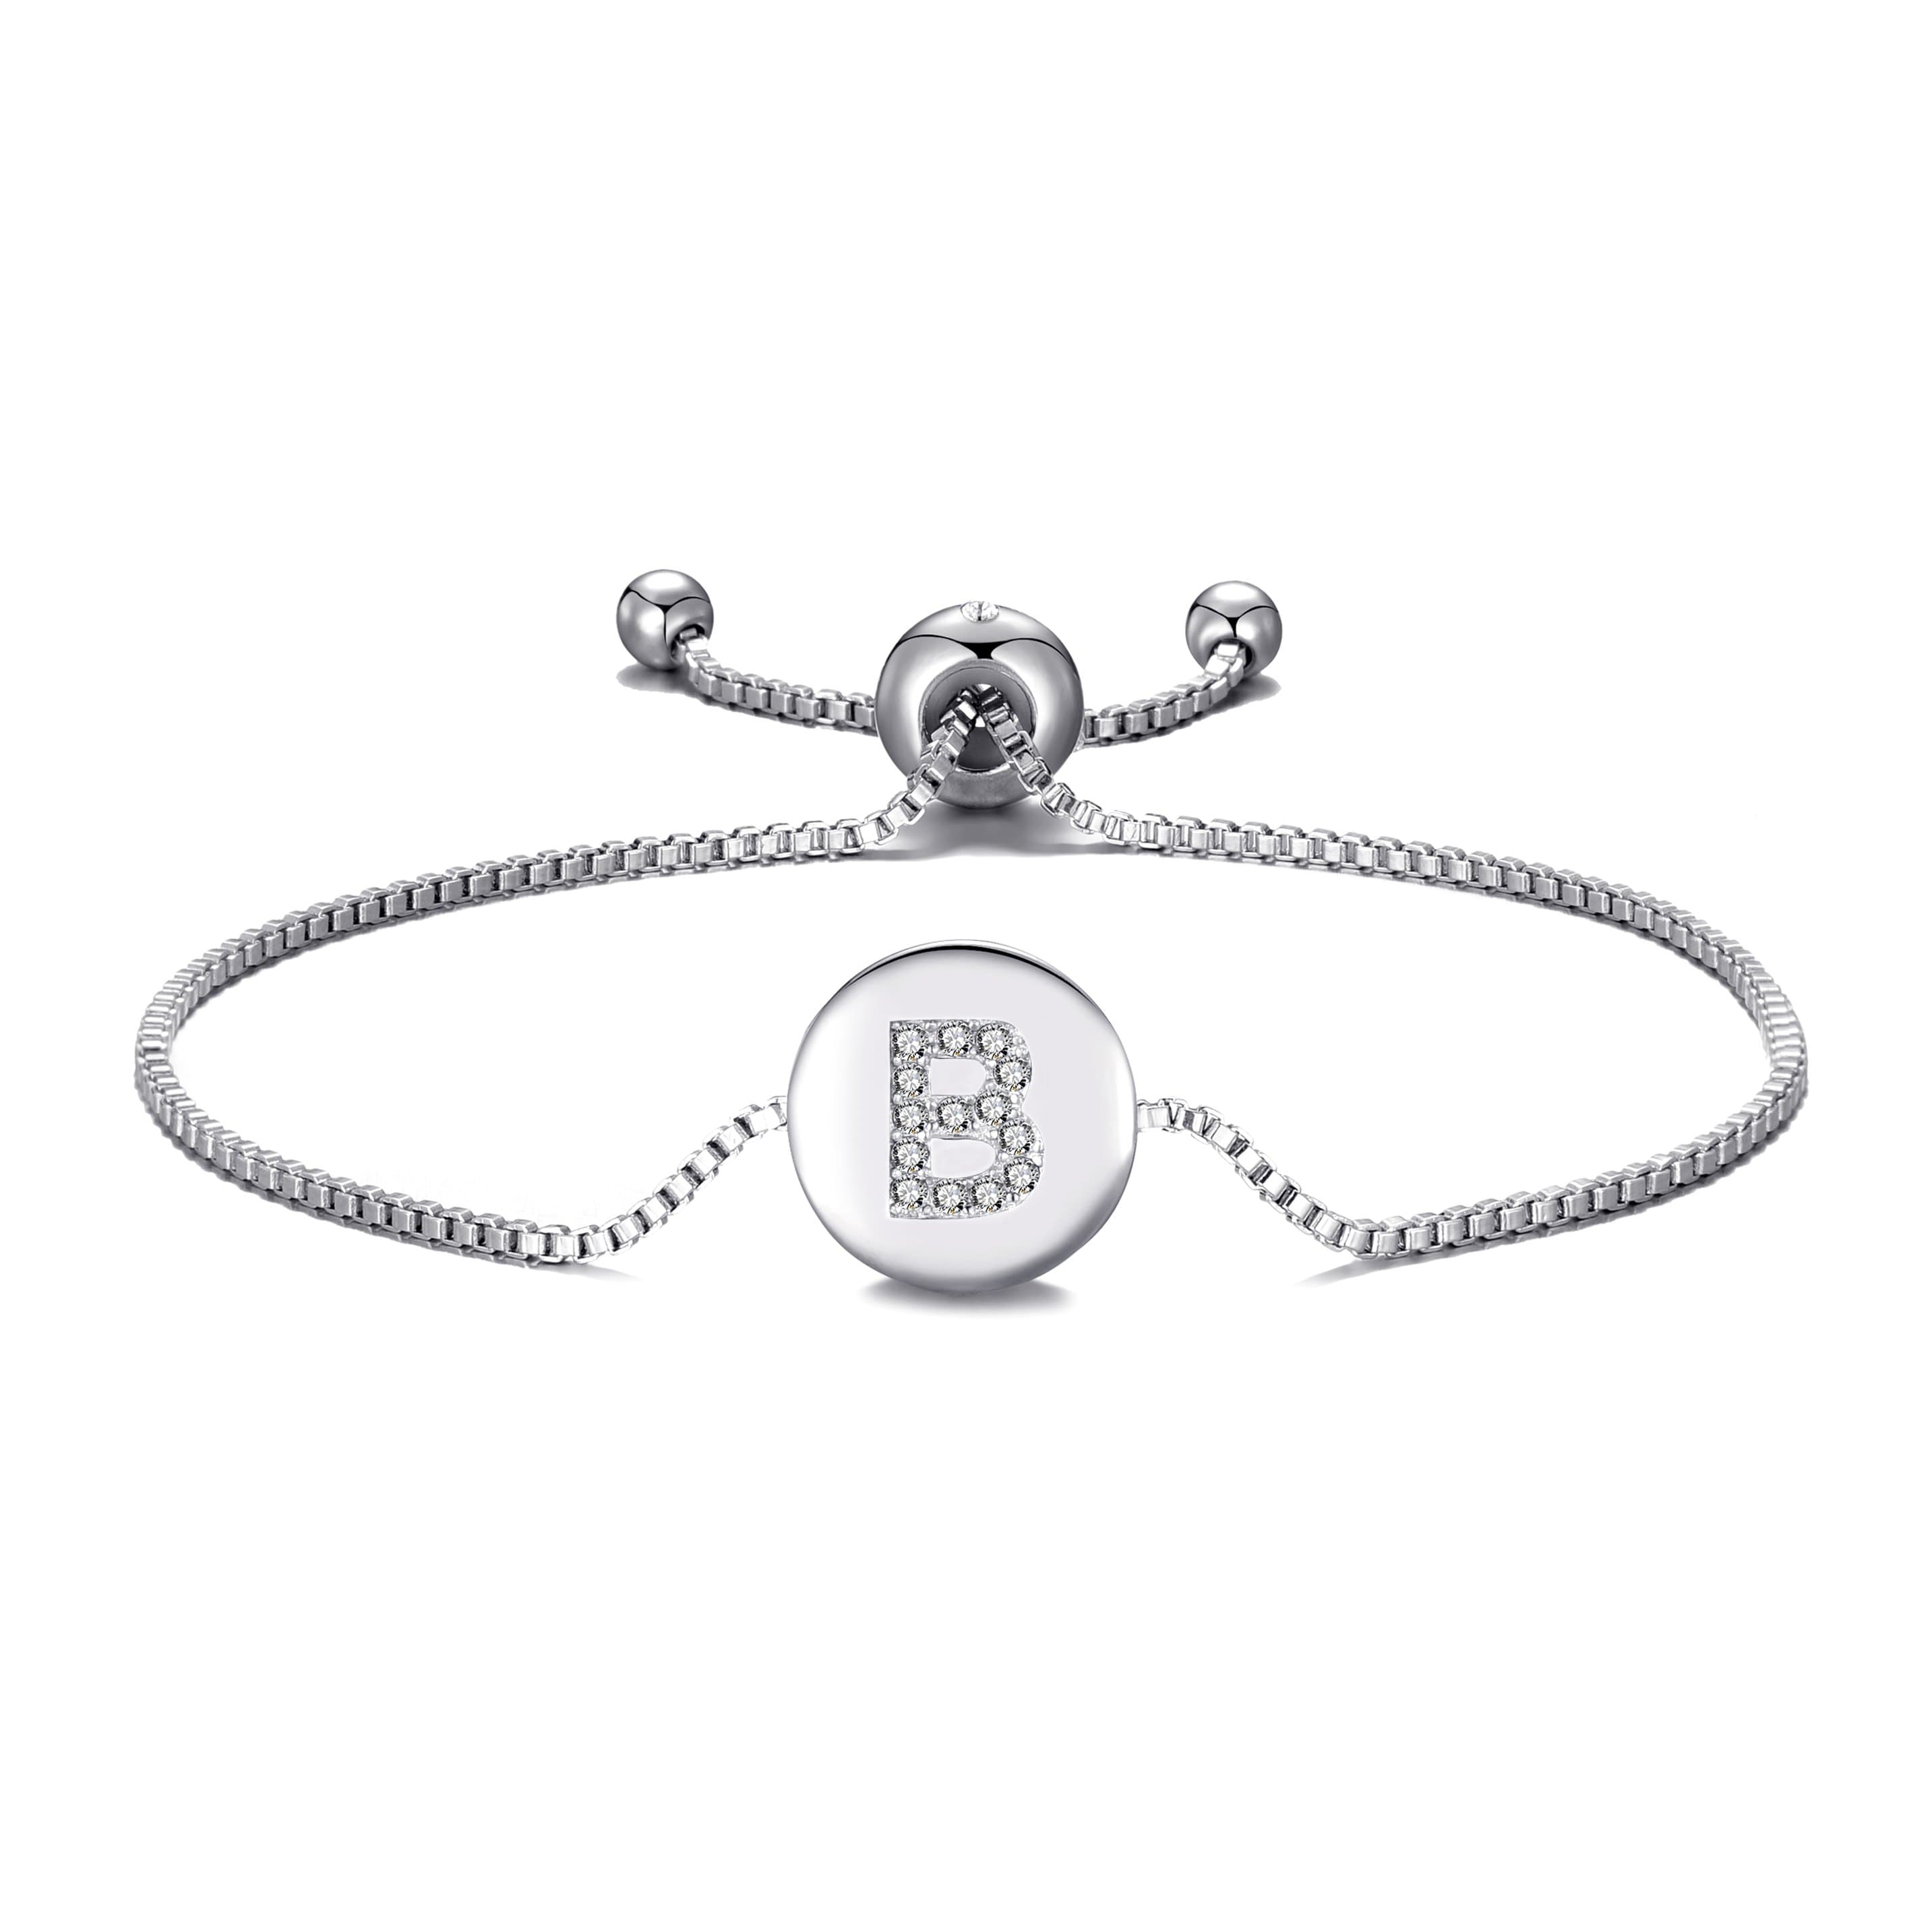 Initial Friendship Bracelet Letter B Created with Zircondia® Crystals by Philip Jones Jewellery